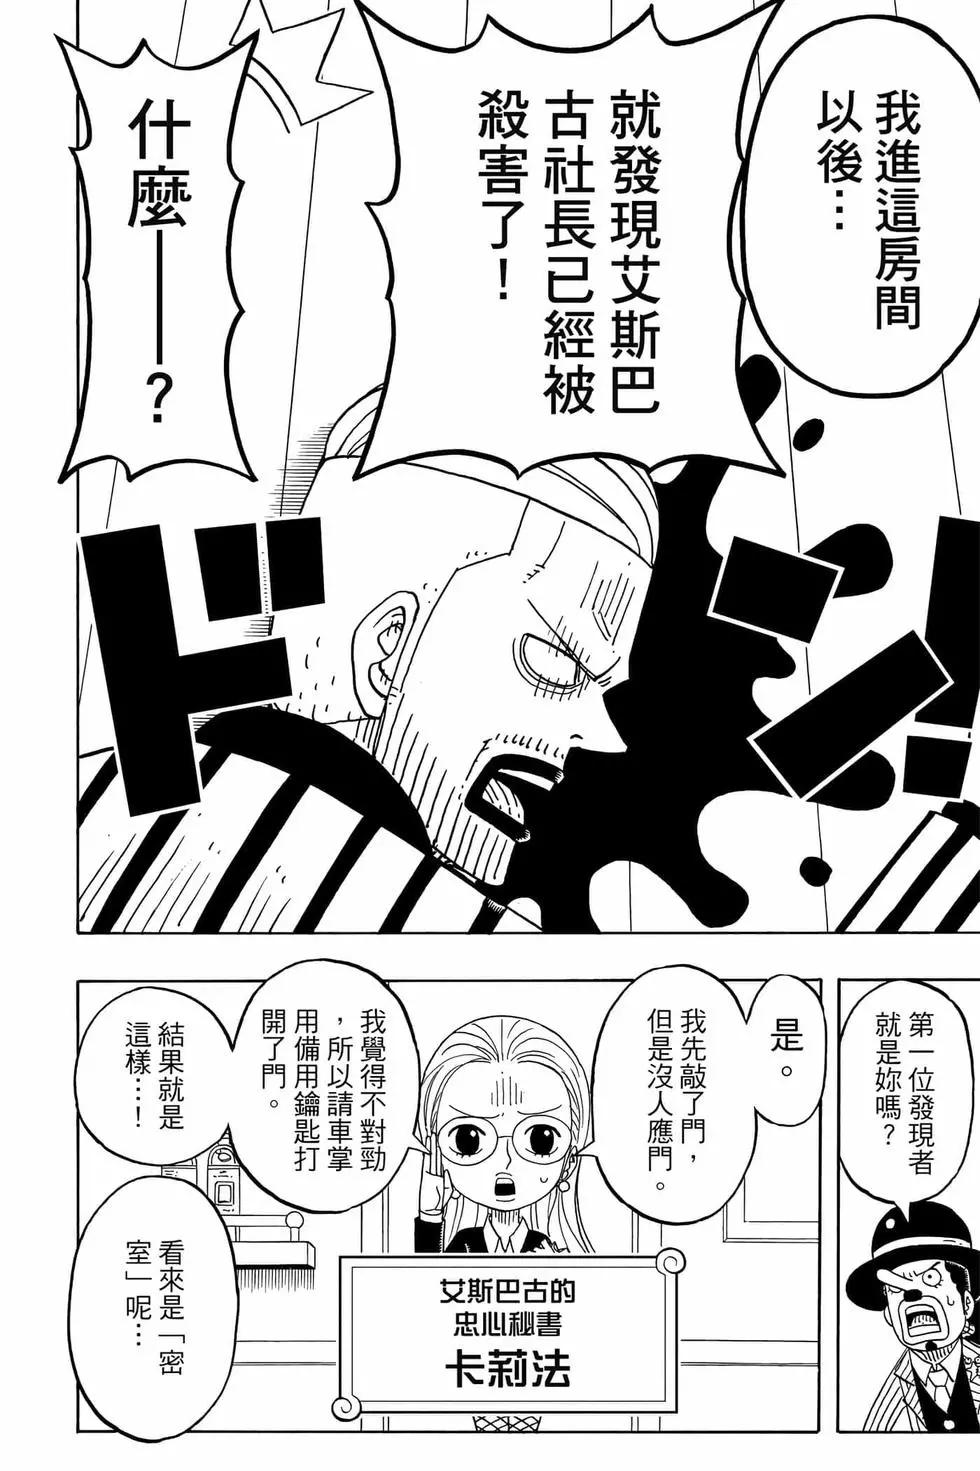 One piece party - 第05卷(1/4) - 5